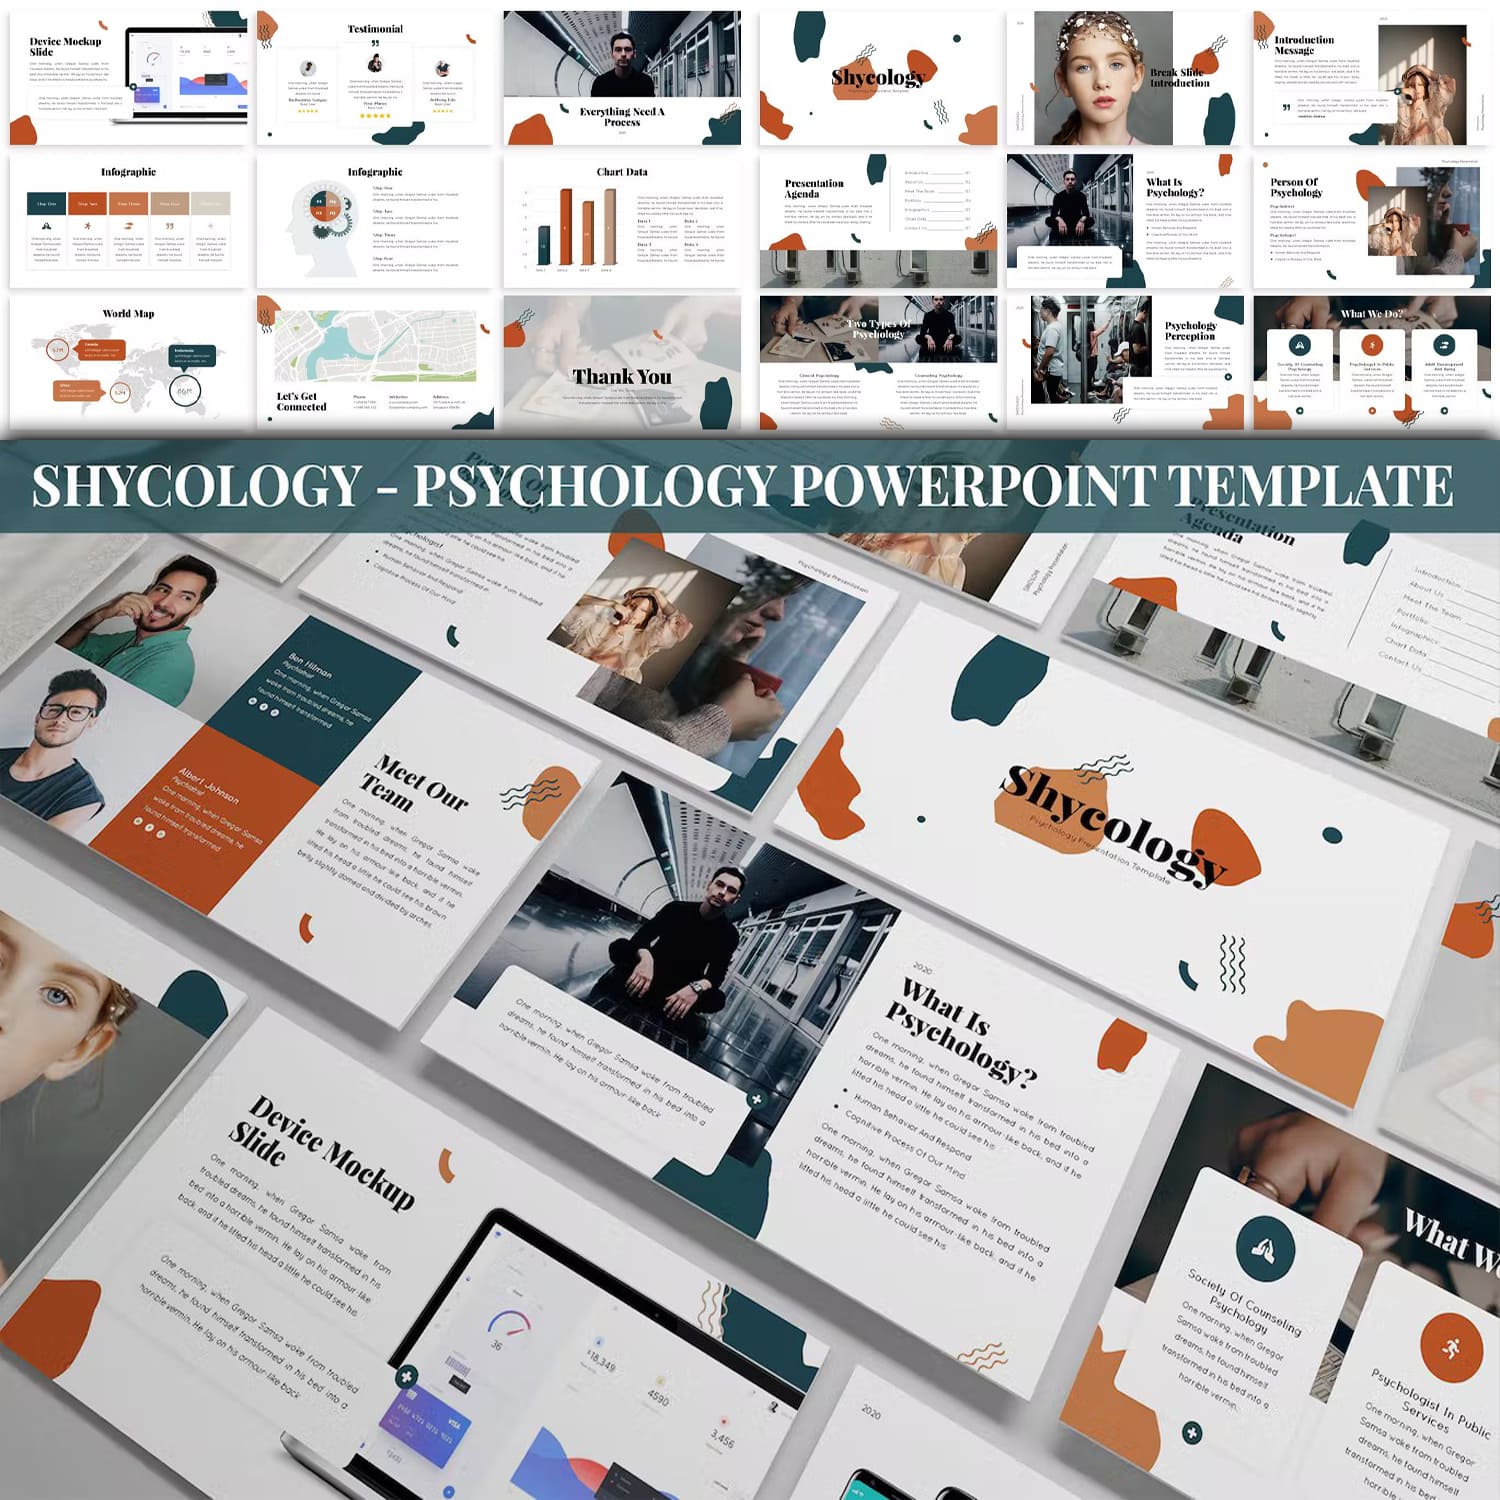 Shycology psychology powerpoint template - main image preview.